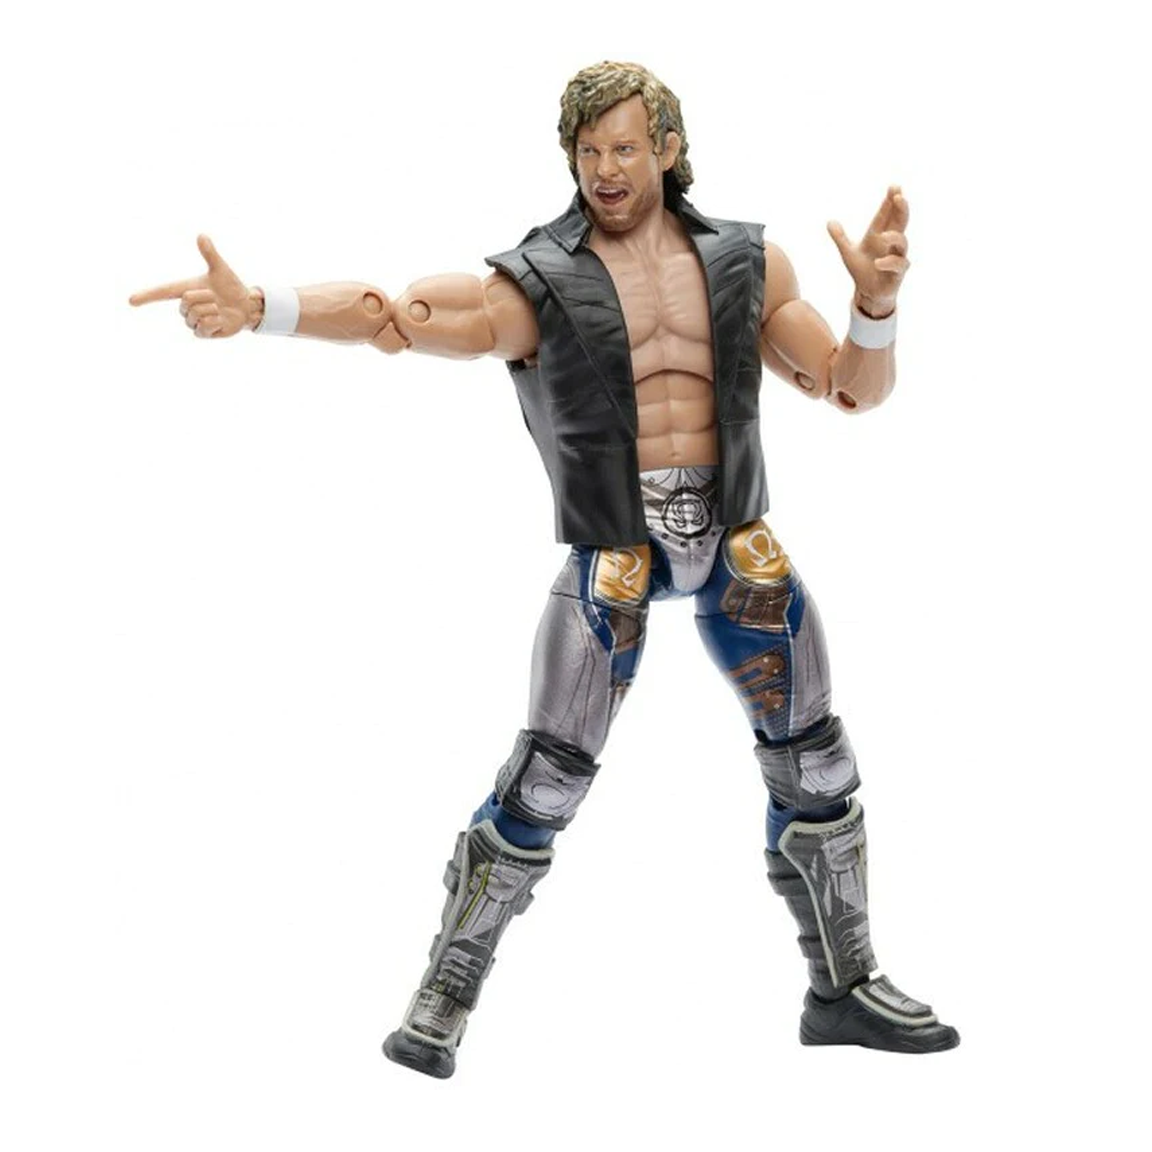 Collectible Jazwares AEW Unrivaled Collection Series 4 Kenny Omega Action Figure with interchangeable parts